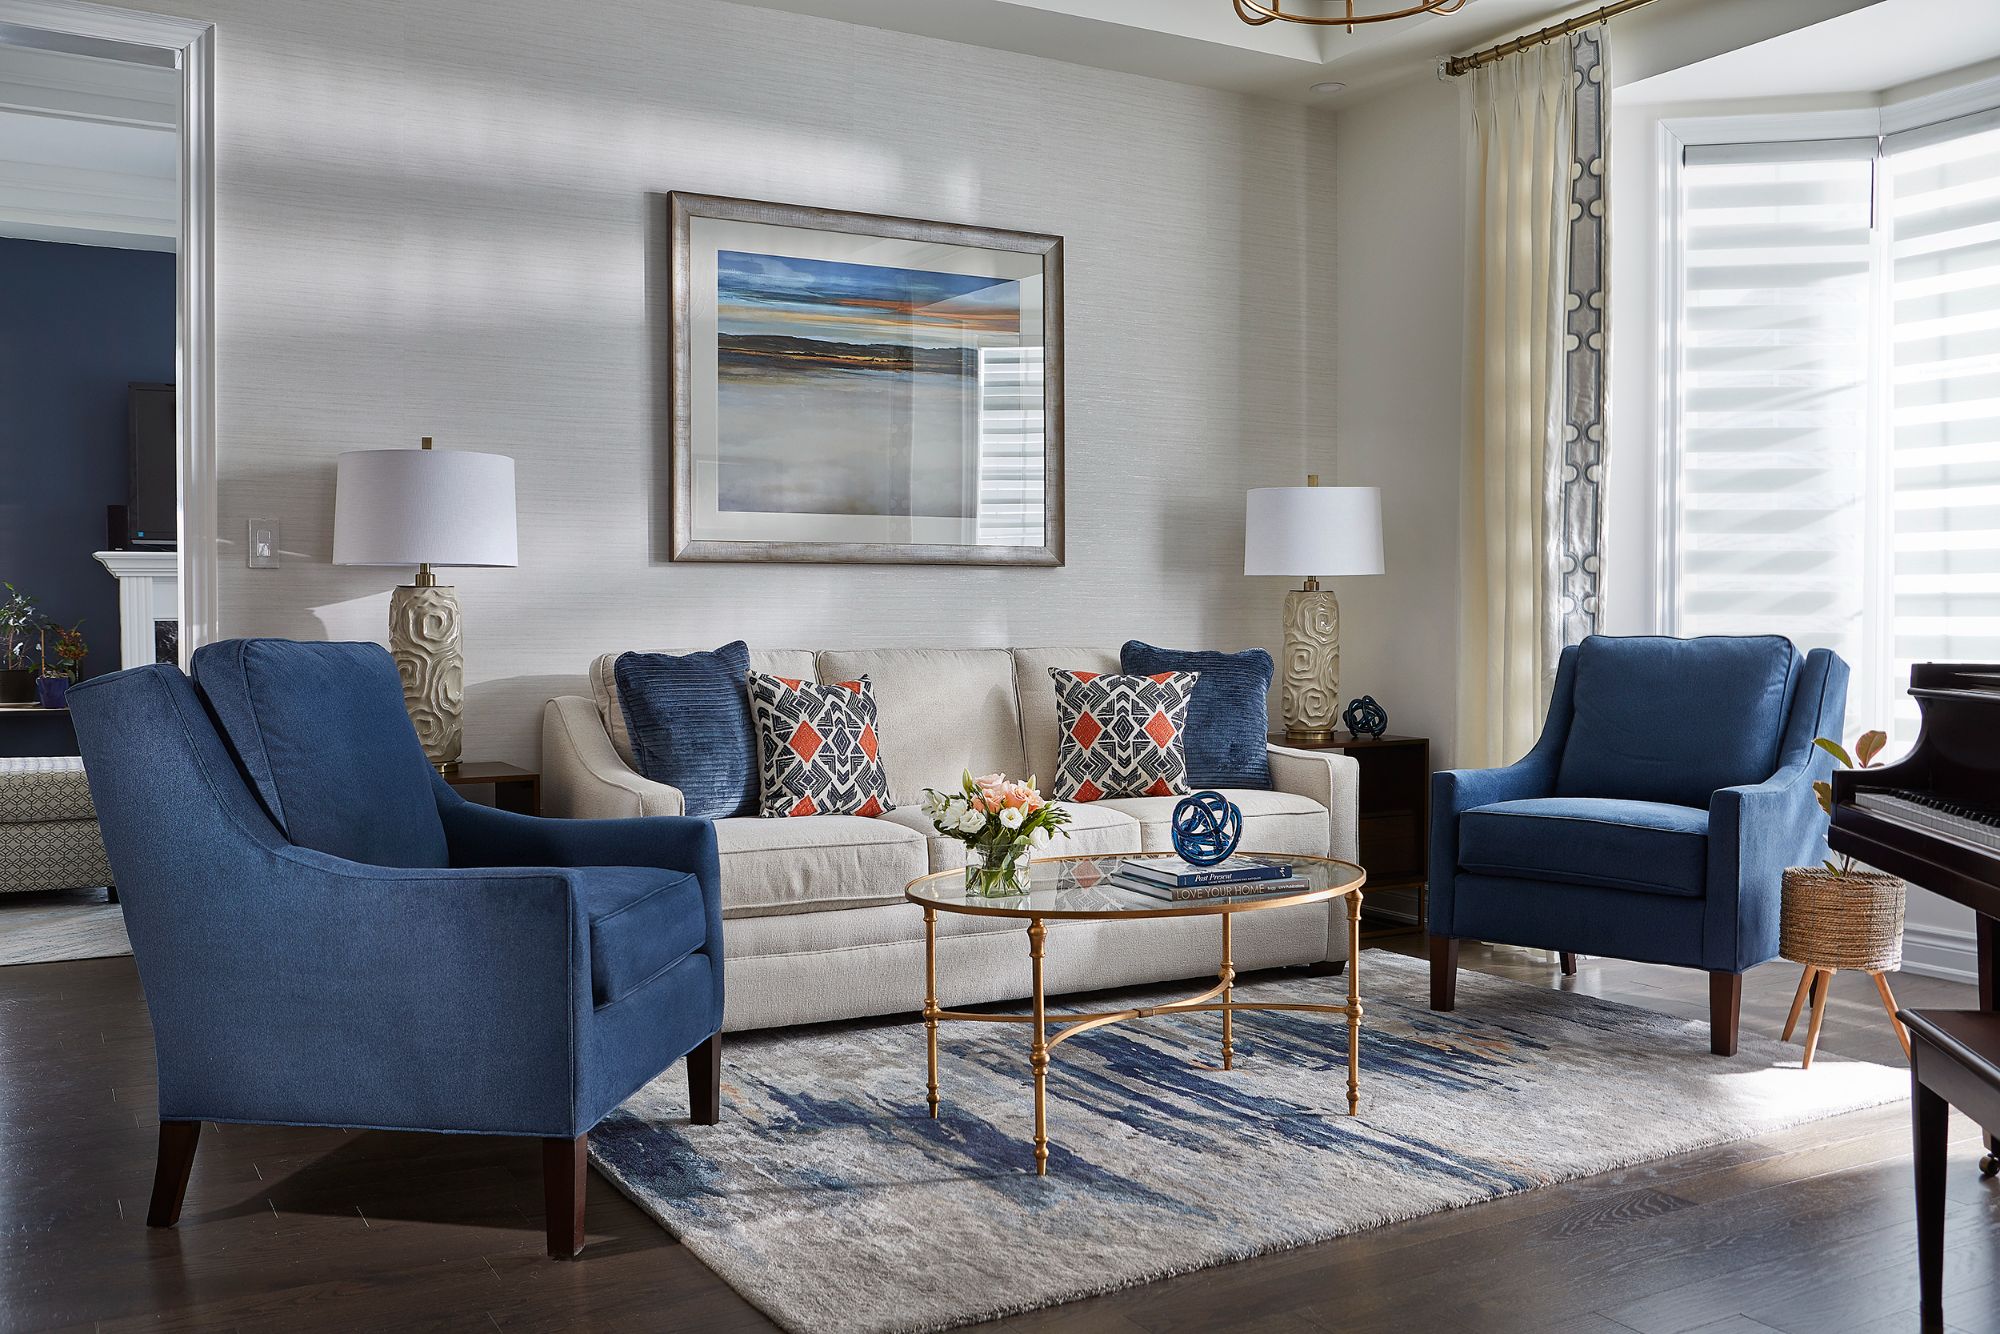 Luxury Interior Service: Sofa and two navy accents chairs